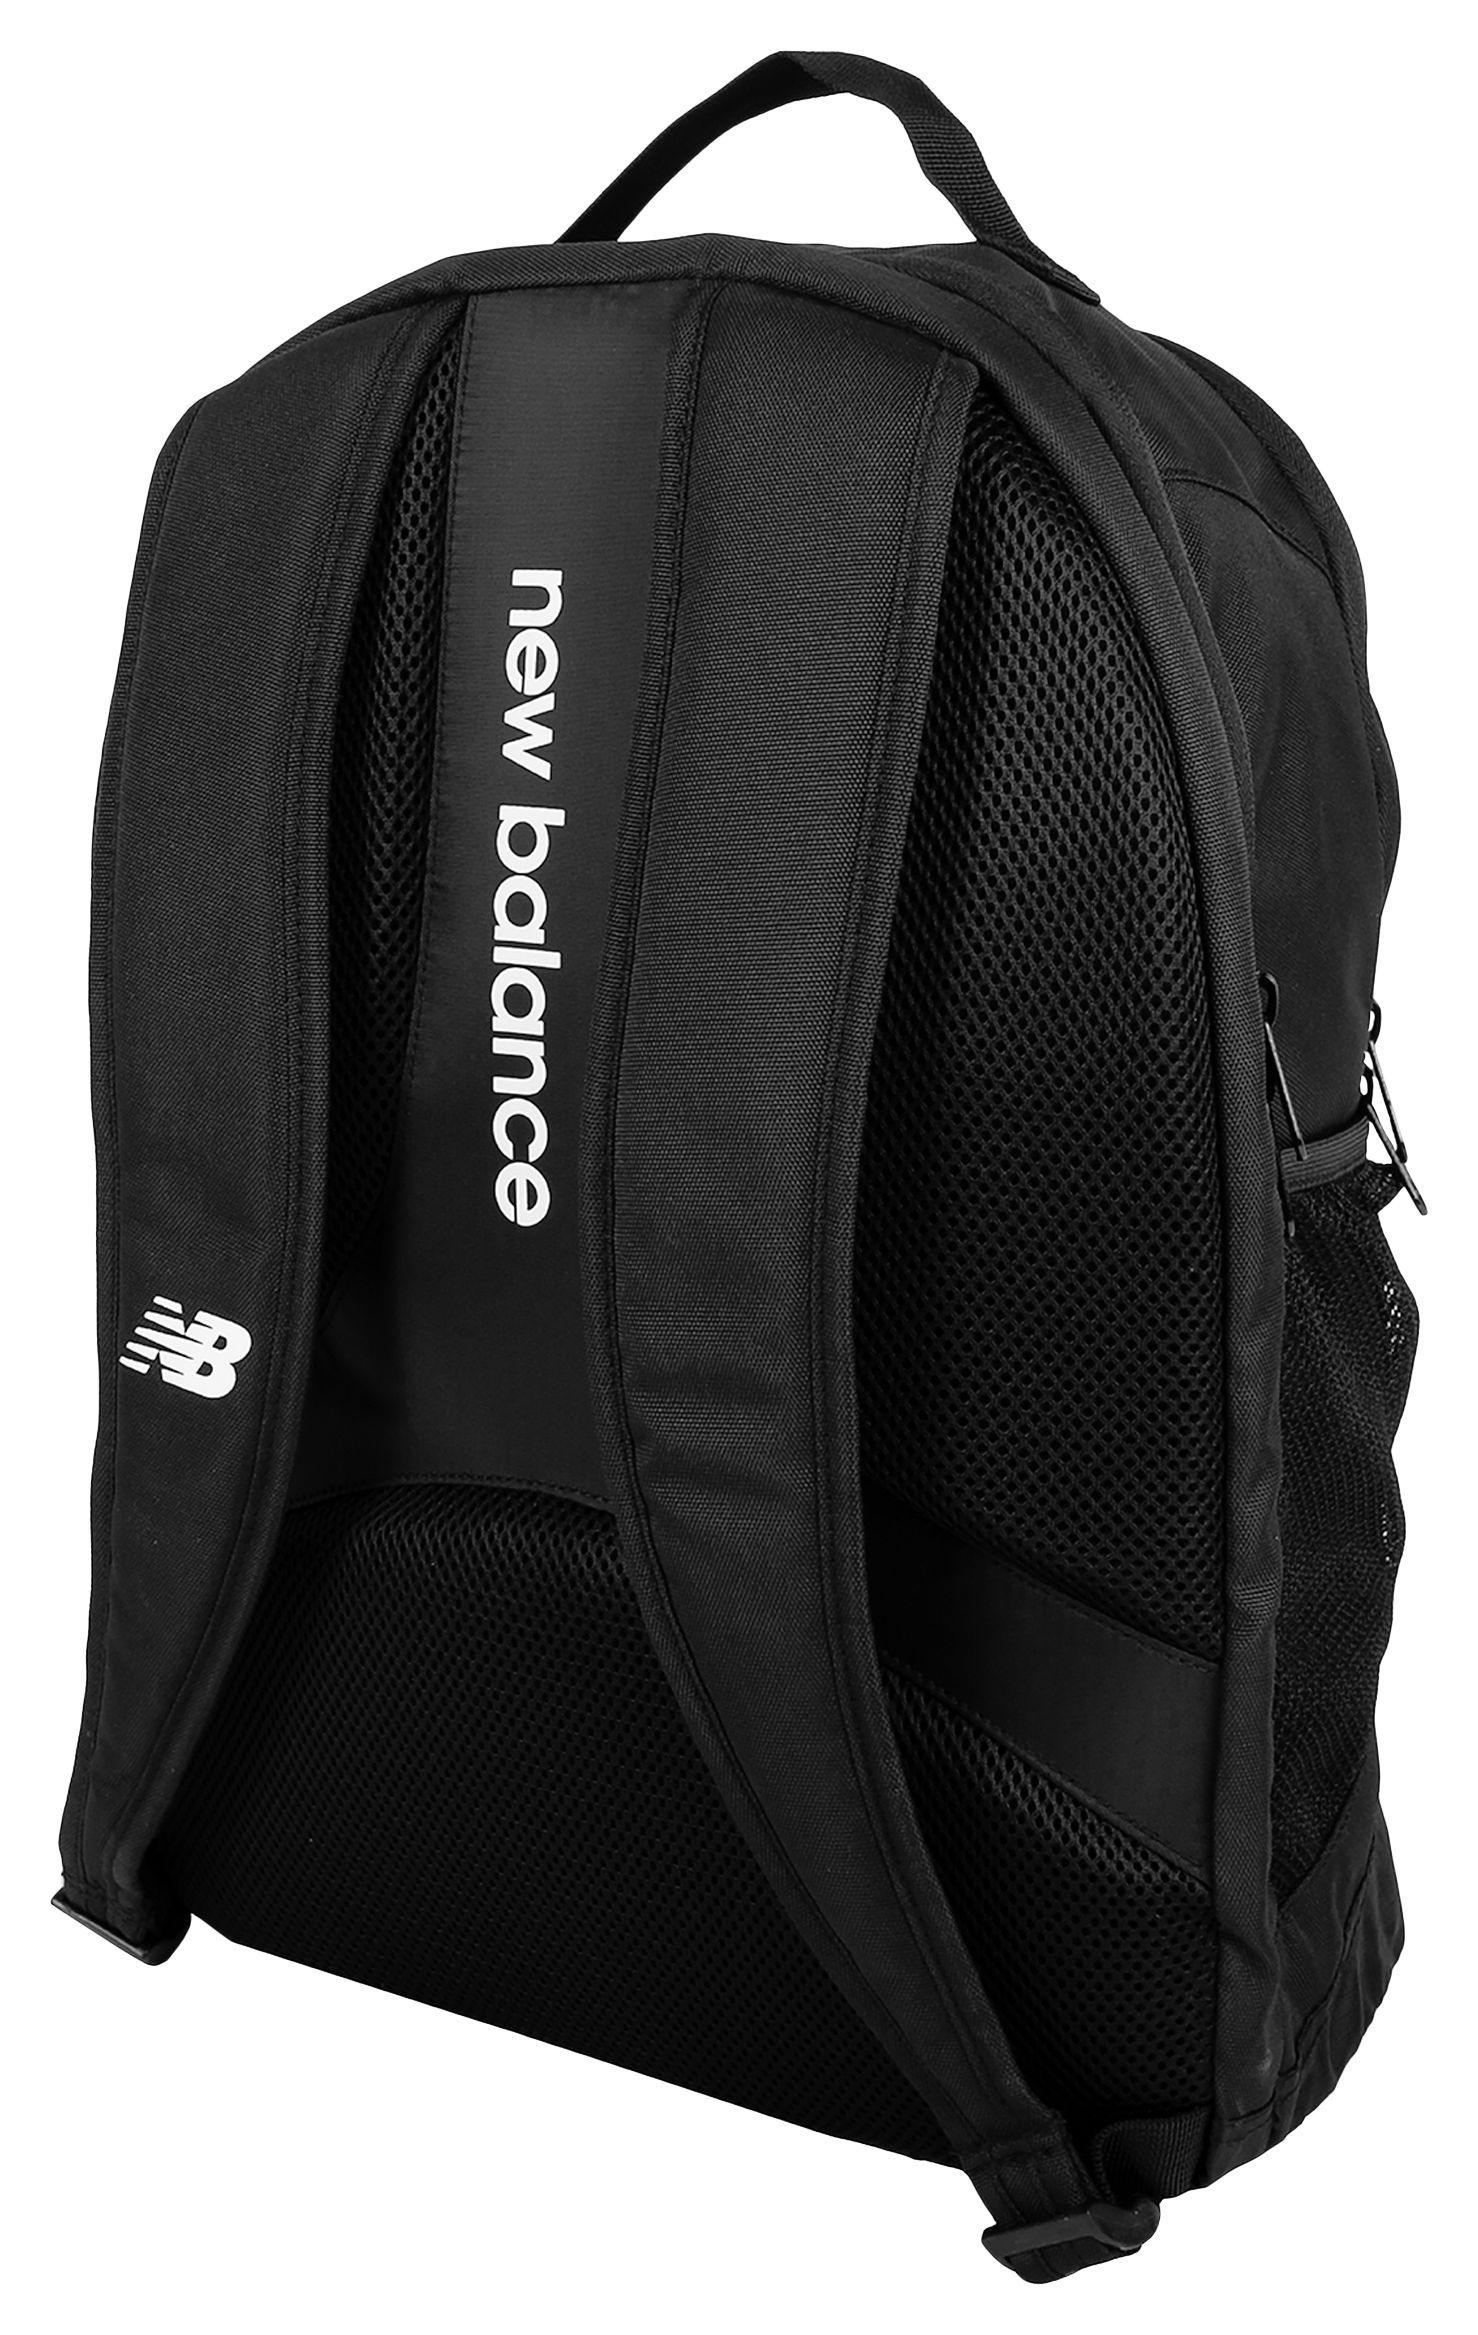 Players Backpack - New Balance